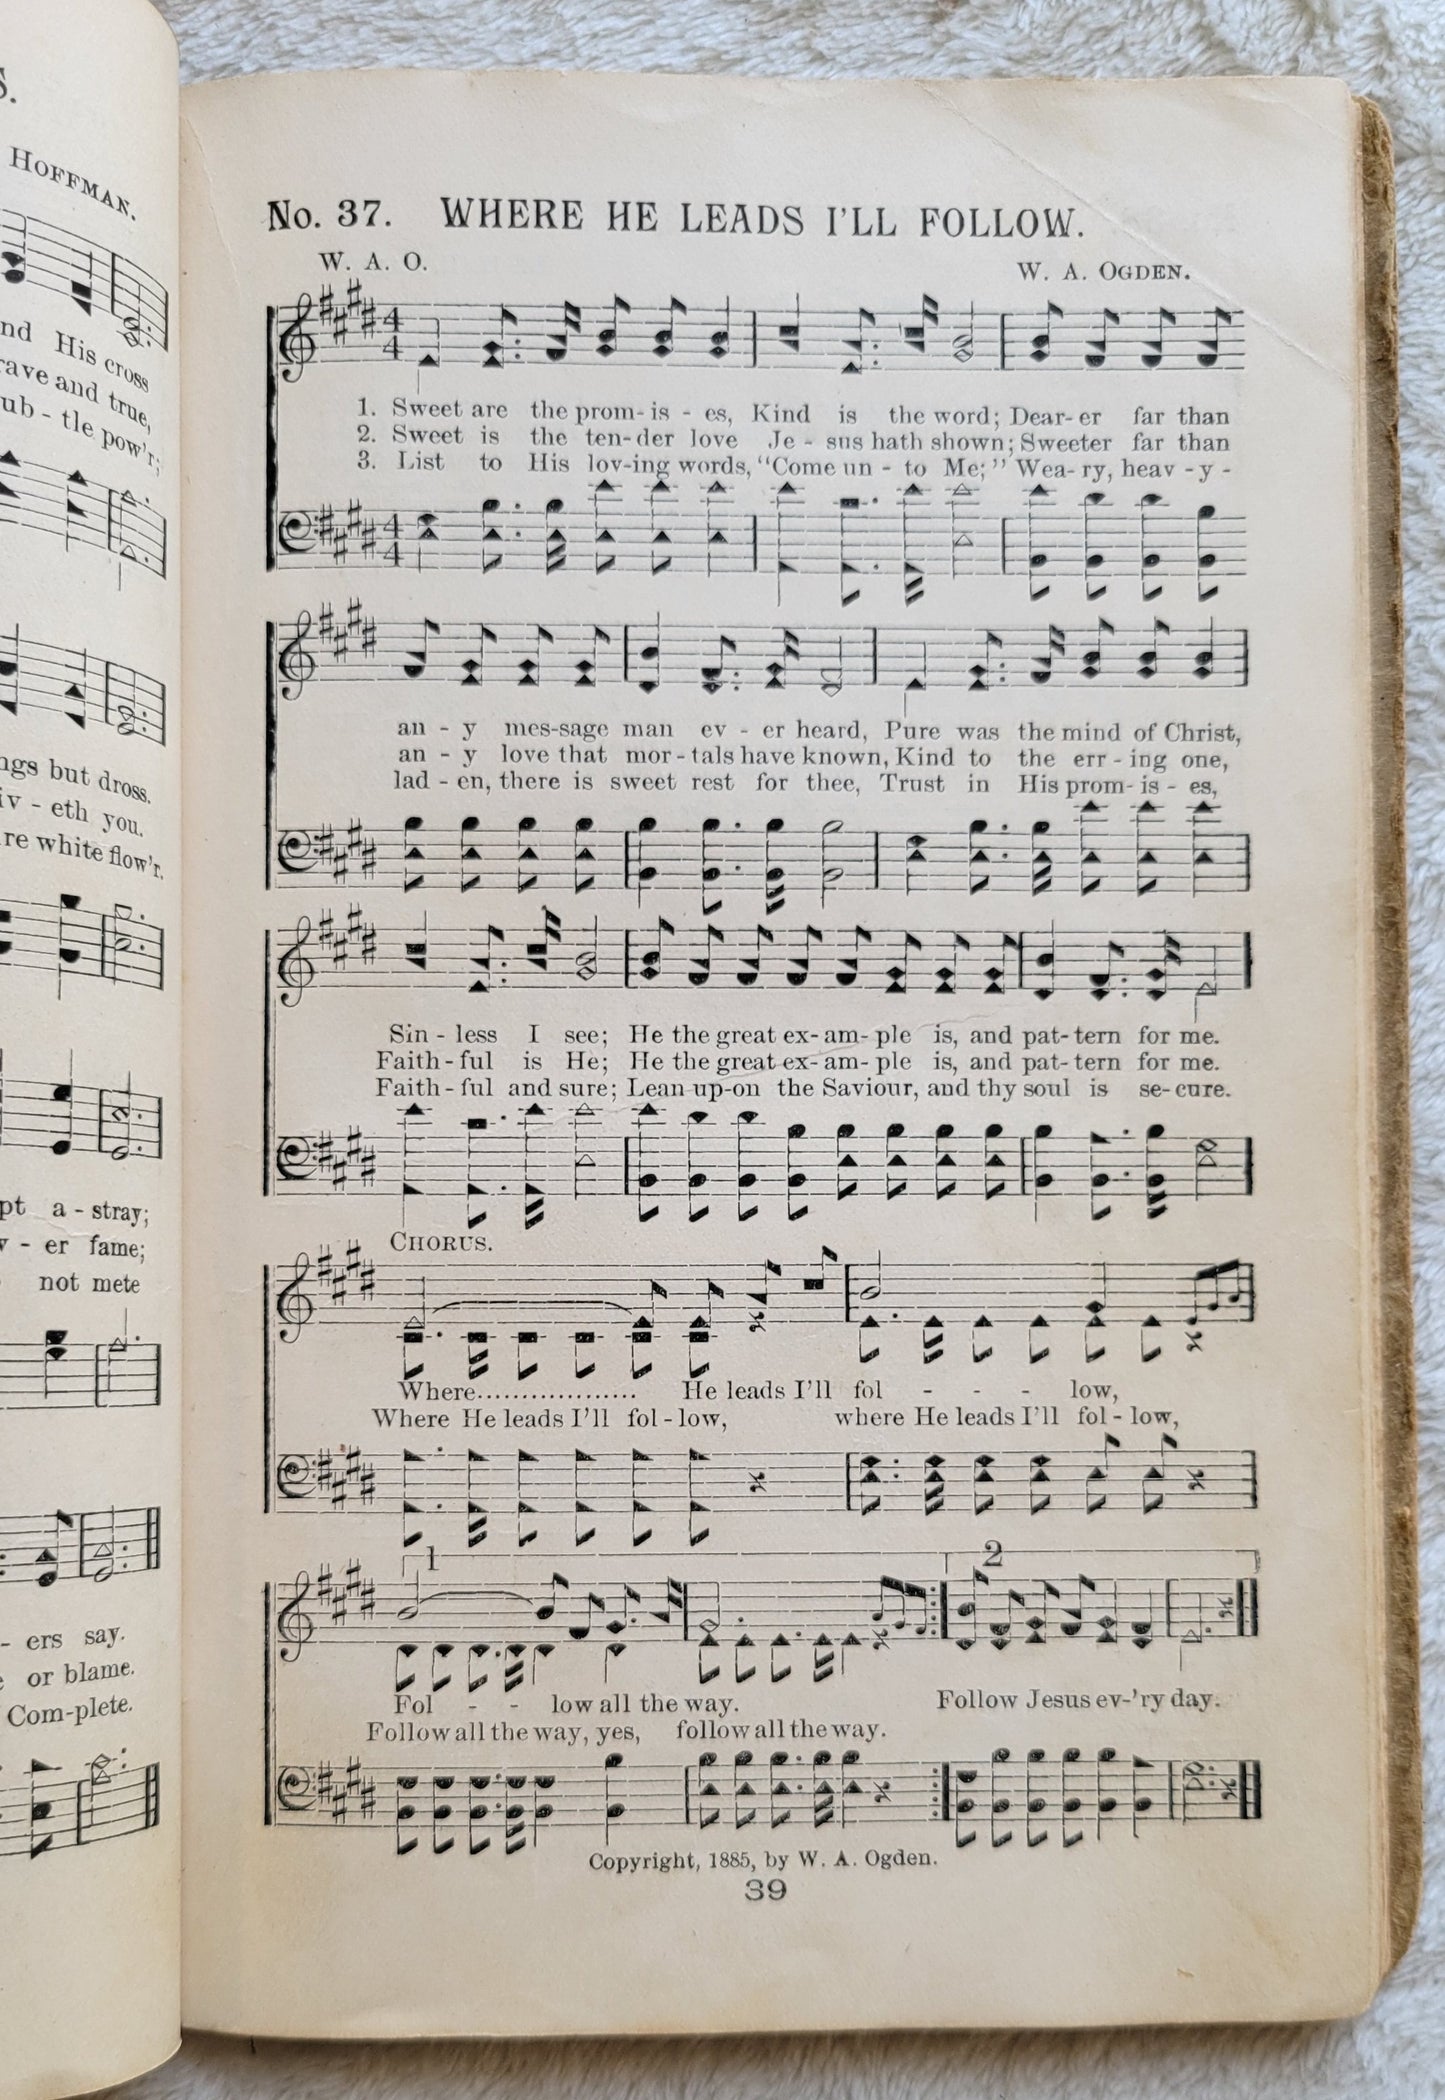 Antique book Crowning Day No. 5 is a Christian hymn book, copyrighted in 1902 by J. H. Hall, W. H. Ruebush, and J. H. Ruebush and published by the Ruebush-Kieffer Company, Dayton, Virginia.  View of song no. 37 Where He Leads I'll Follow